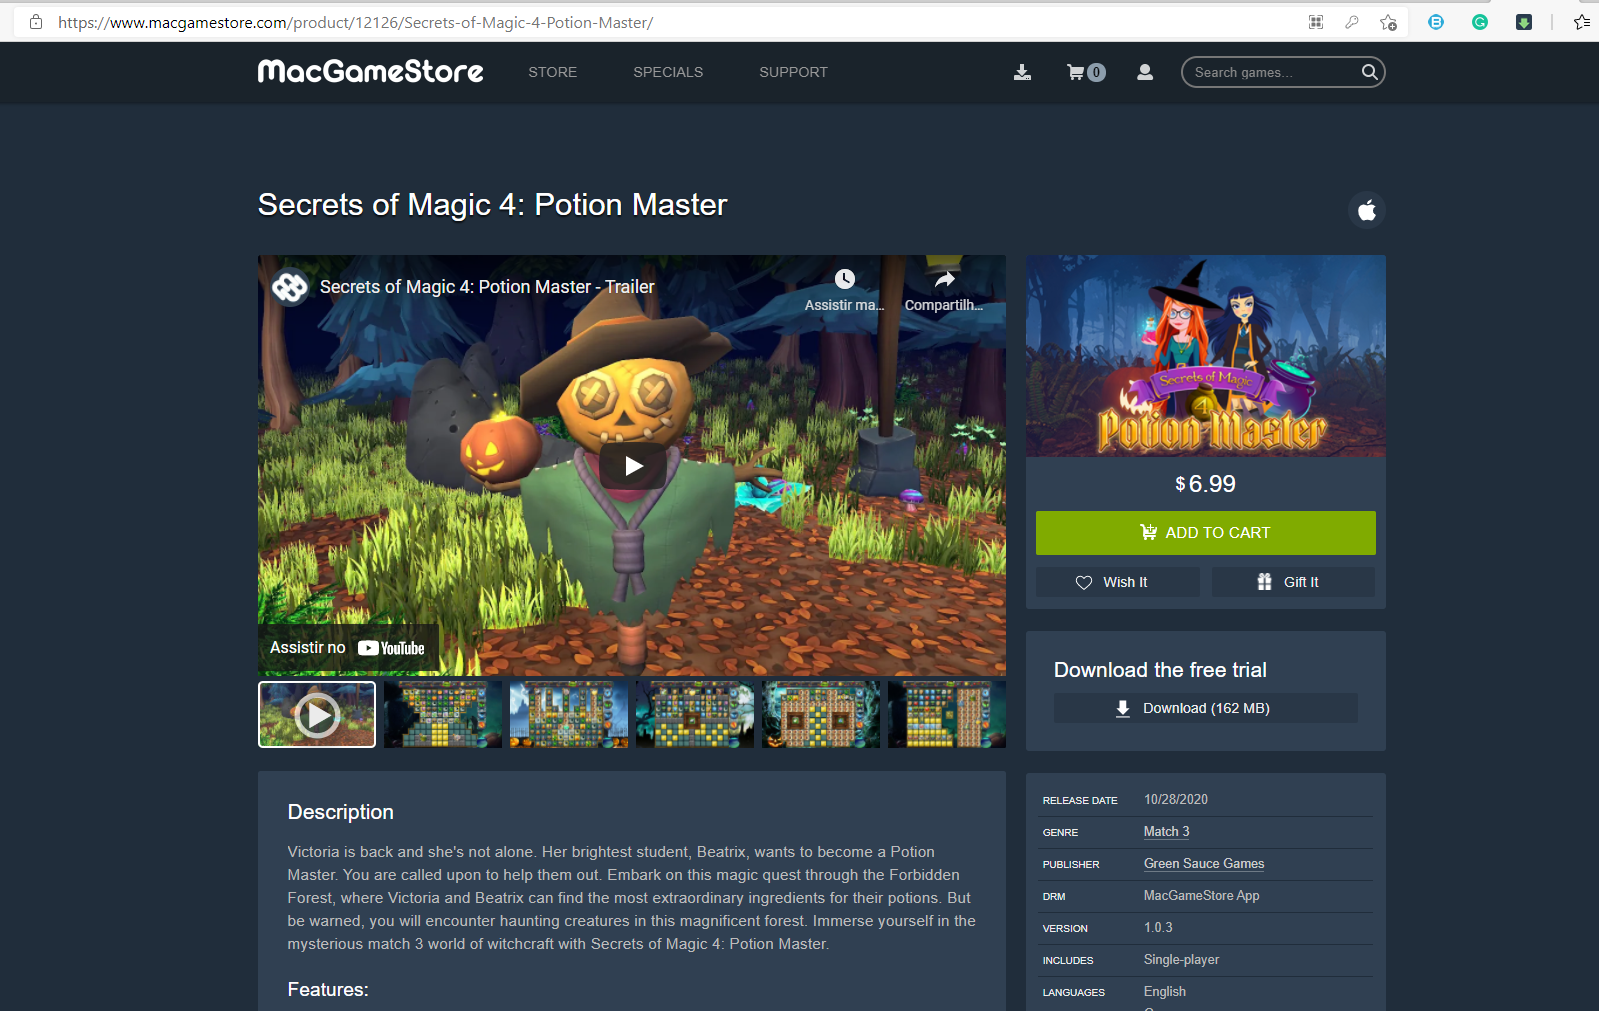 what platform are games sold for on mac game store?